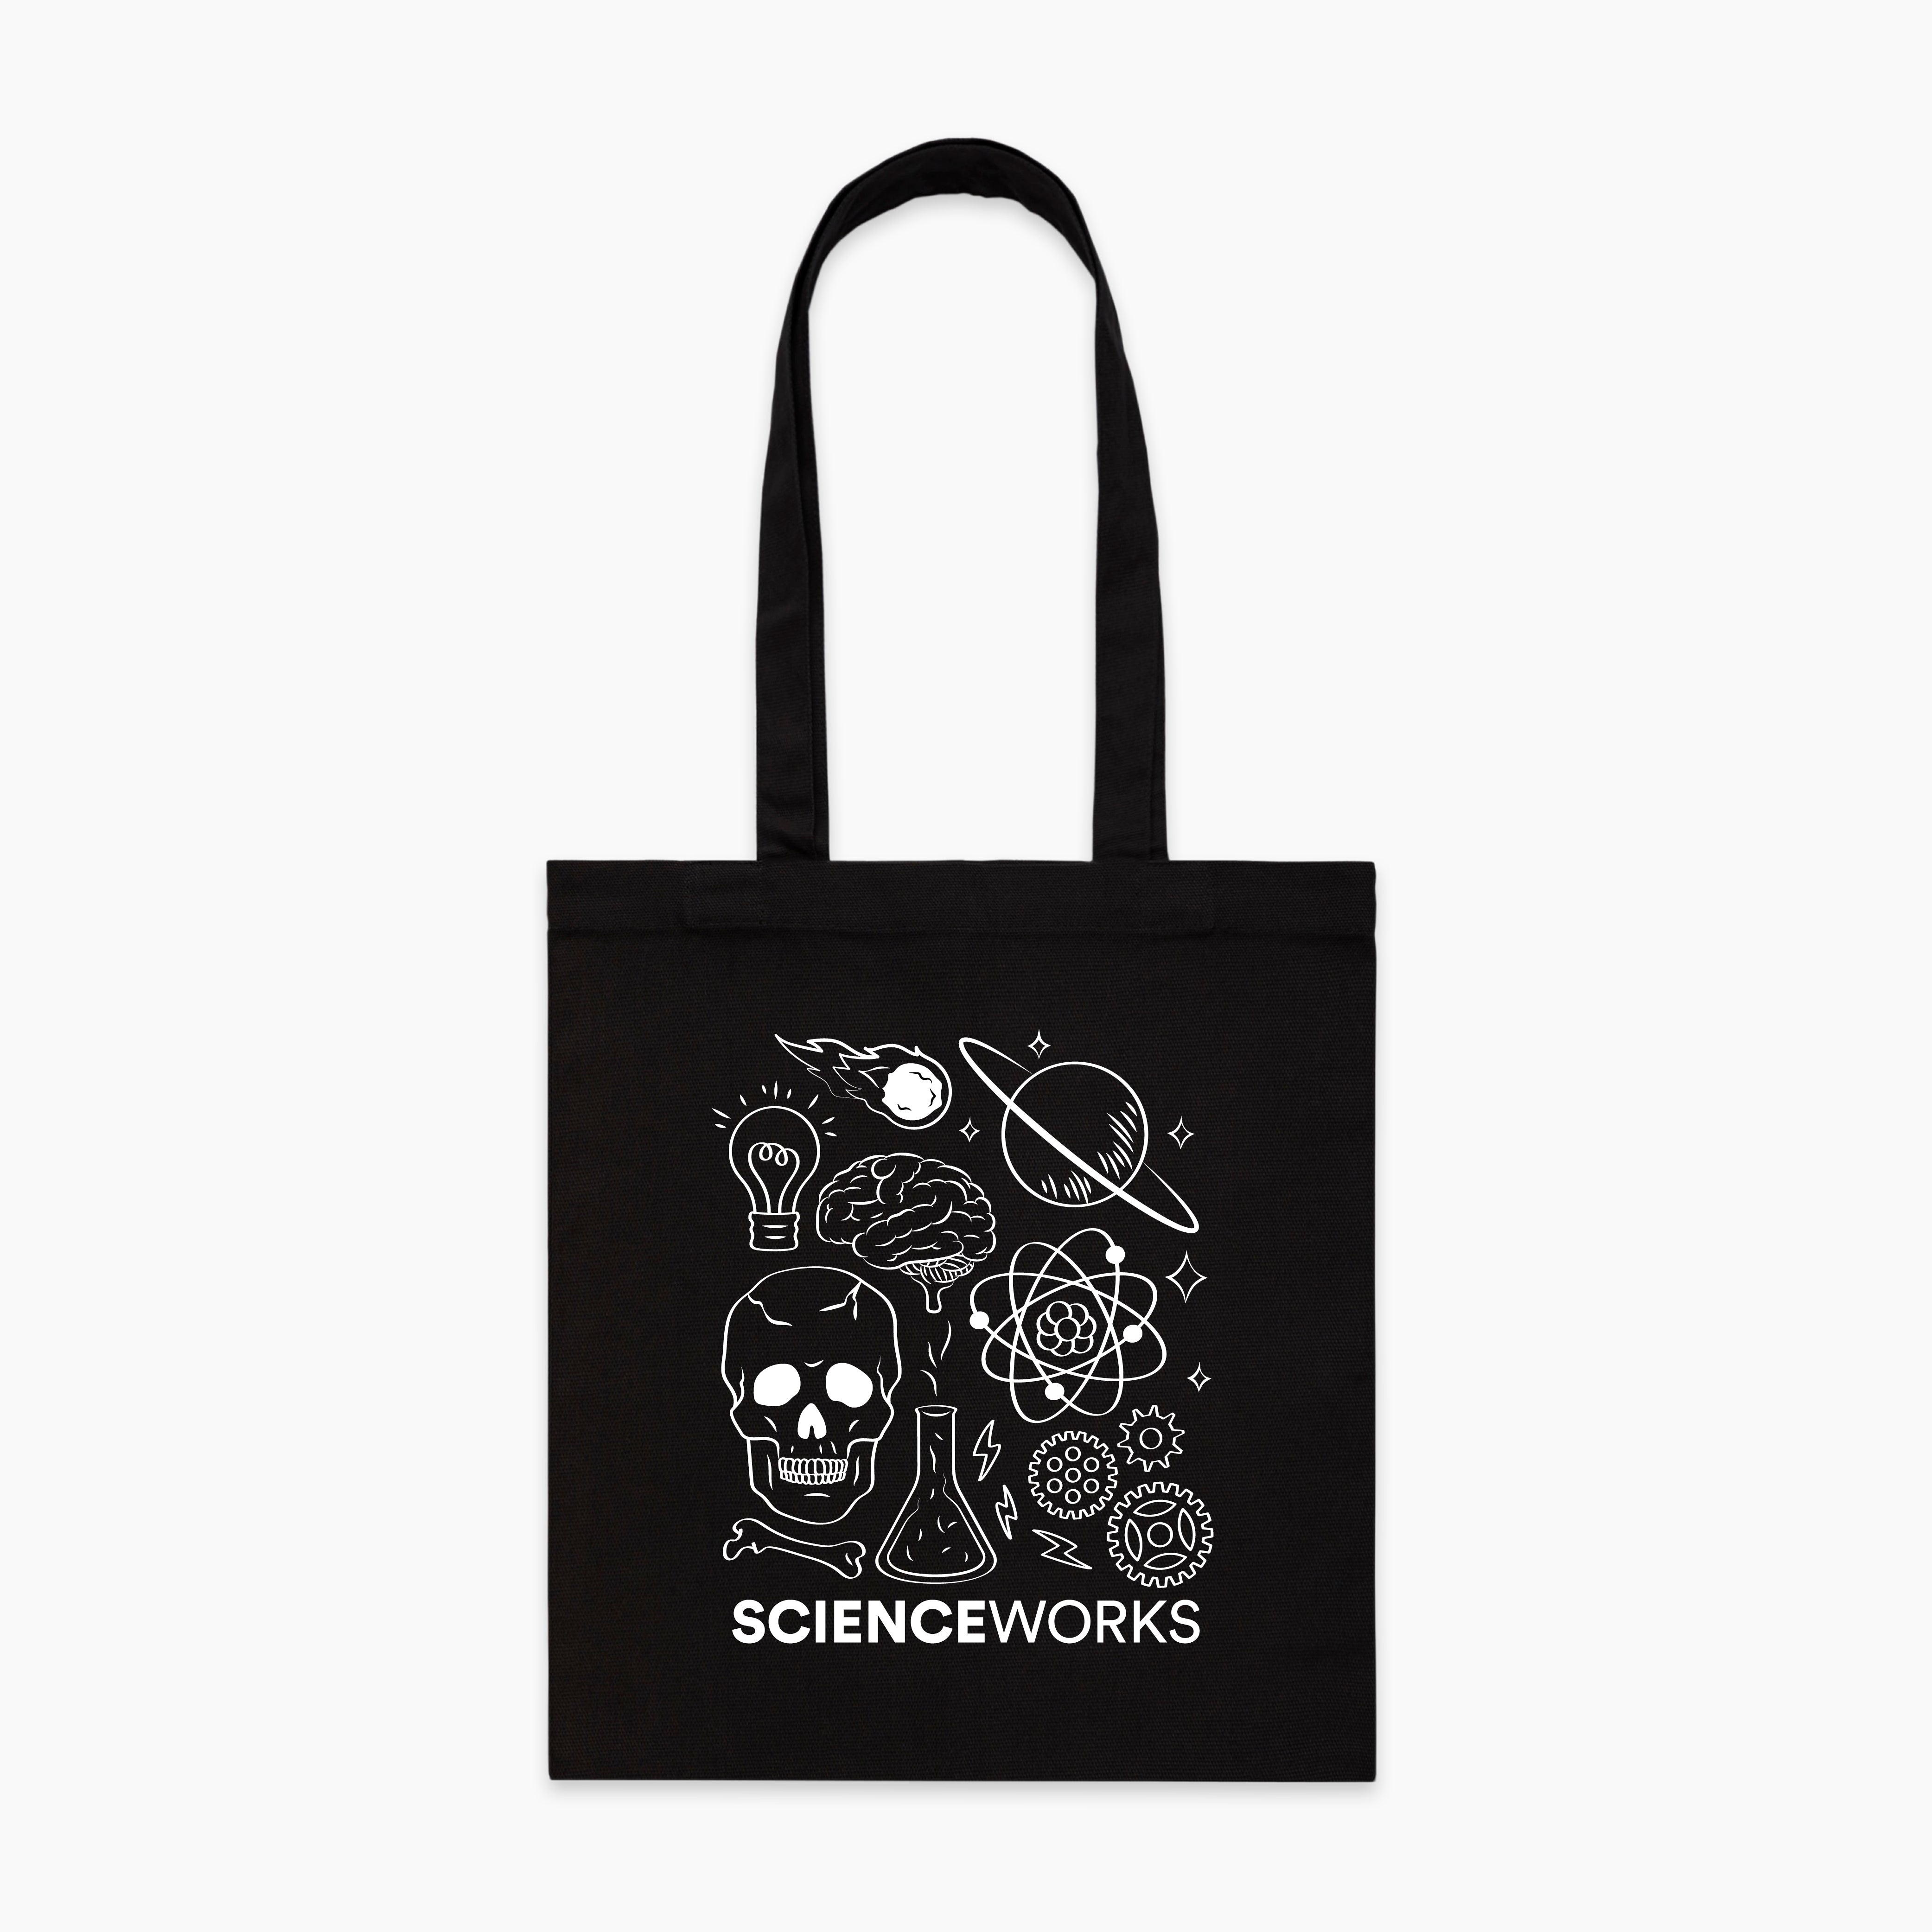 A black rectangle tote bag with a white science illustration. The image contains a lightbulb, a meteor, Saturn, a brain, an atom, stars, a skull, a beaker, a bone, three small lightning bolts, and three gears. SCIENCEWORKS is written across the bottom of the illustration.